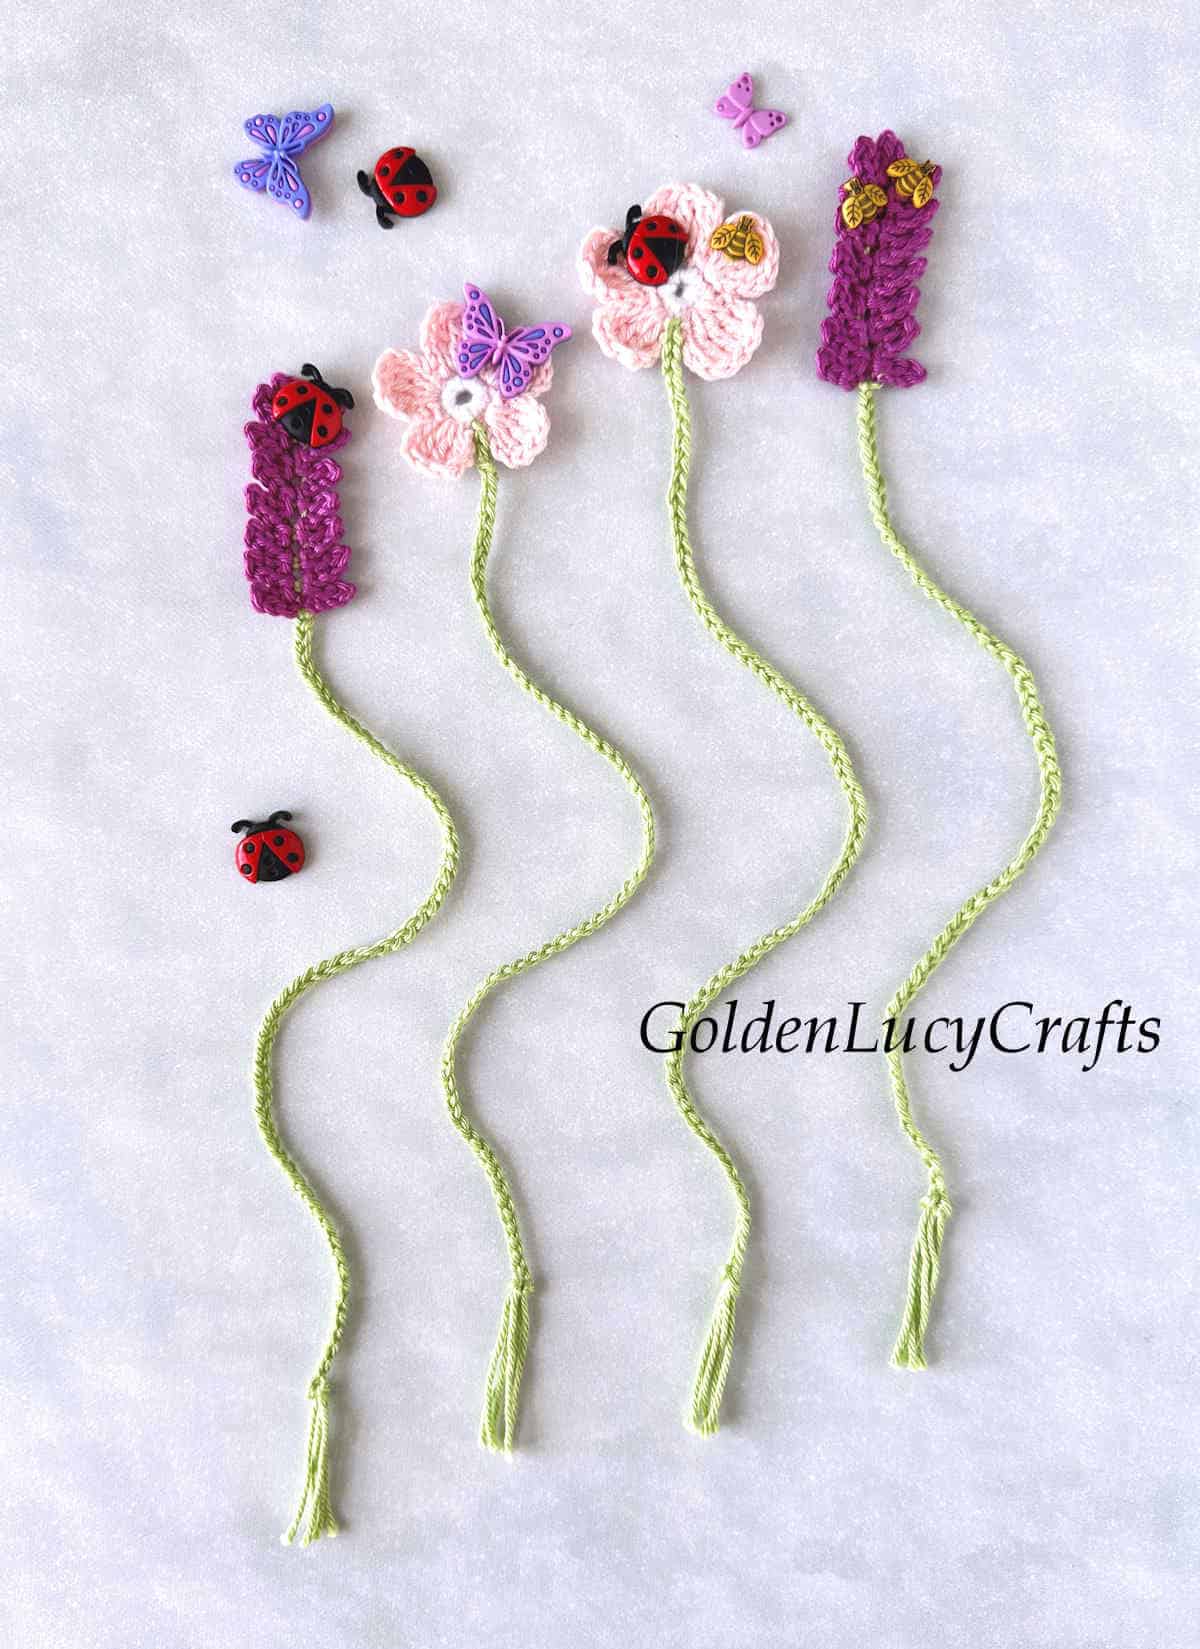 Four crocheted floral bookmarks.